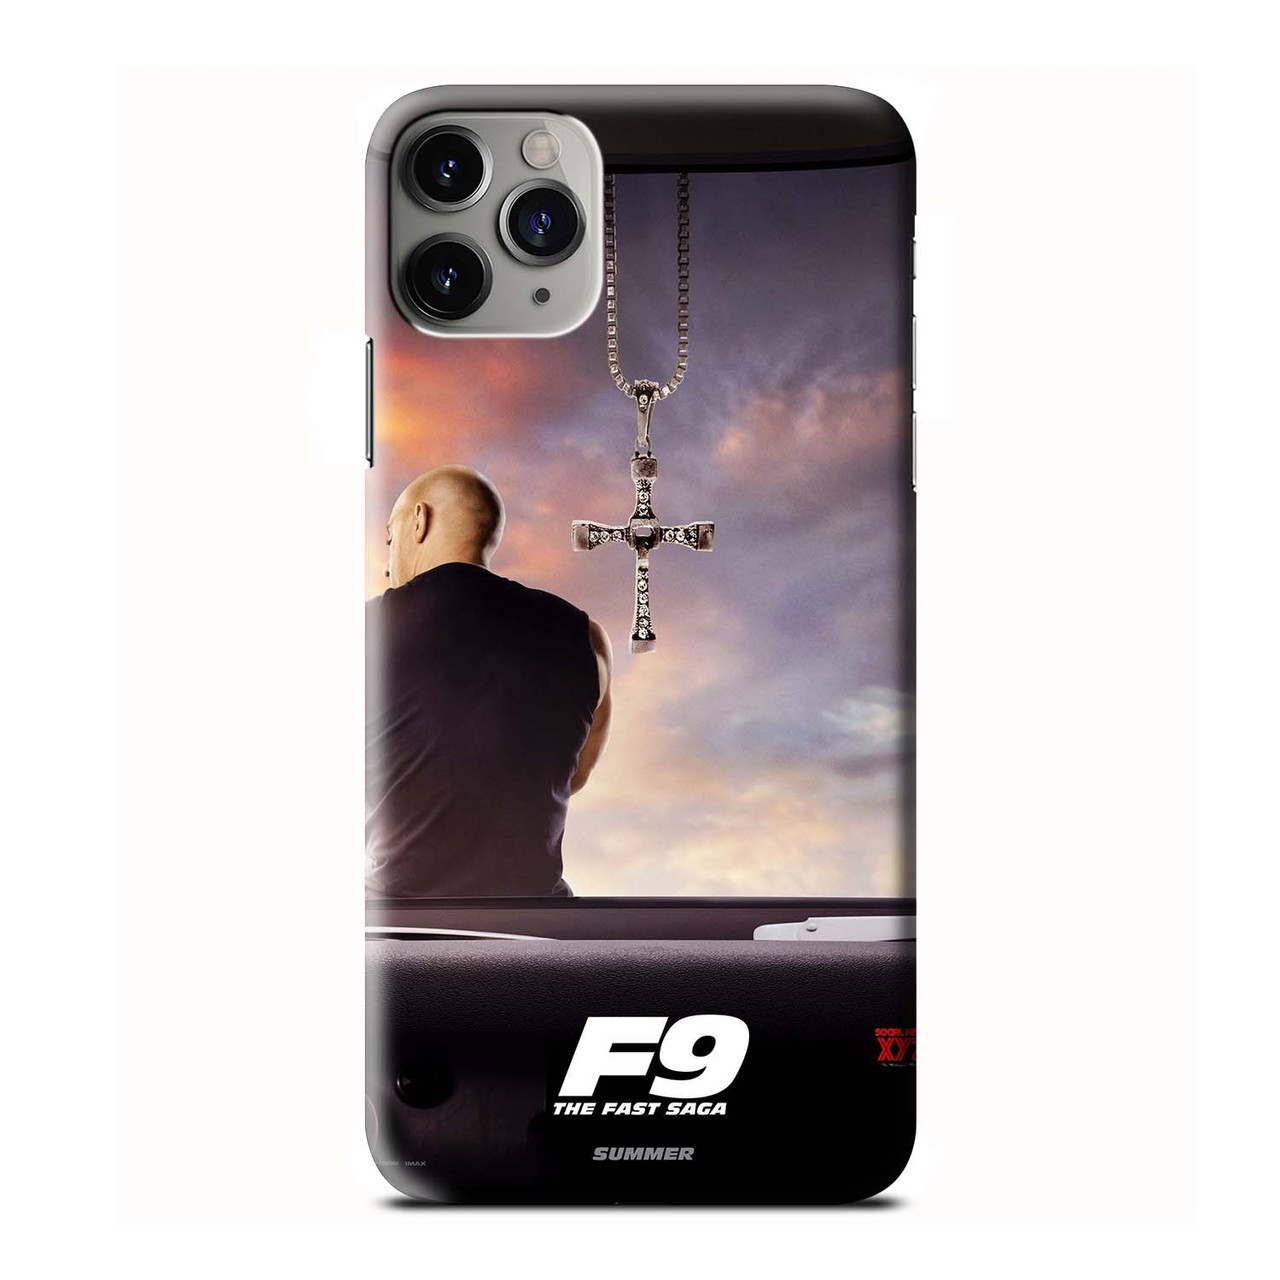 TORETTO FAST AND FURIOUS 9 THE FAST SAGA iPhone 3D